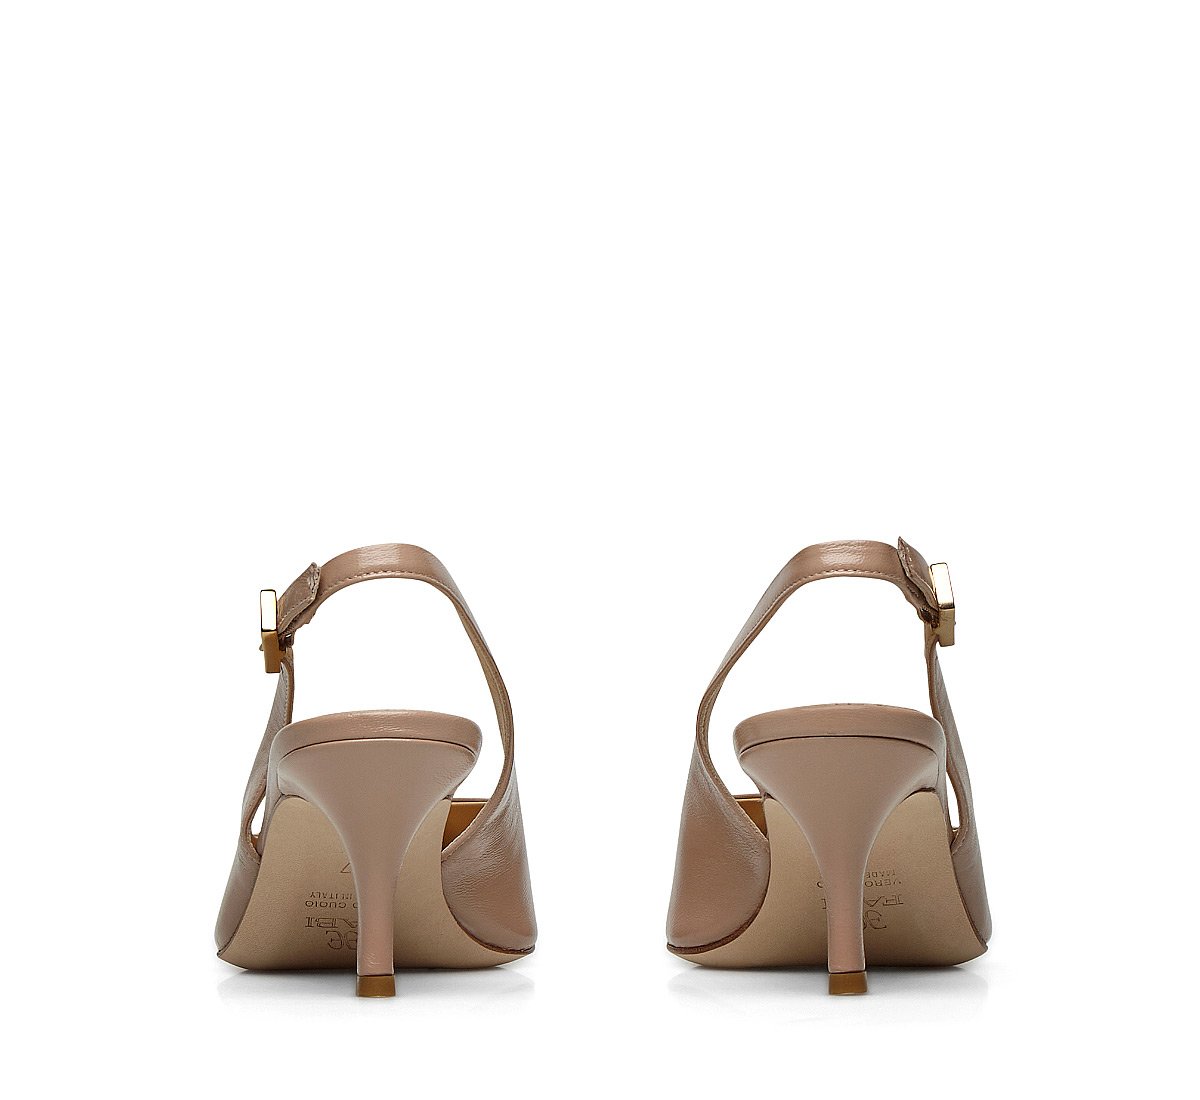 Iconic slingback in soft nappa leather